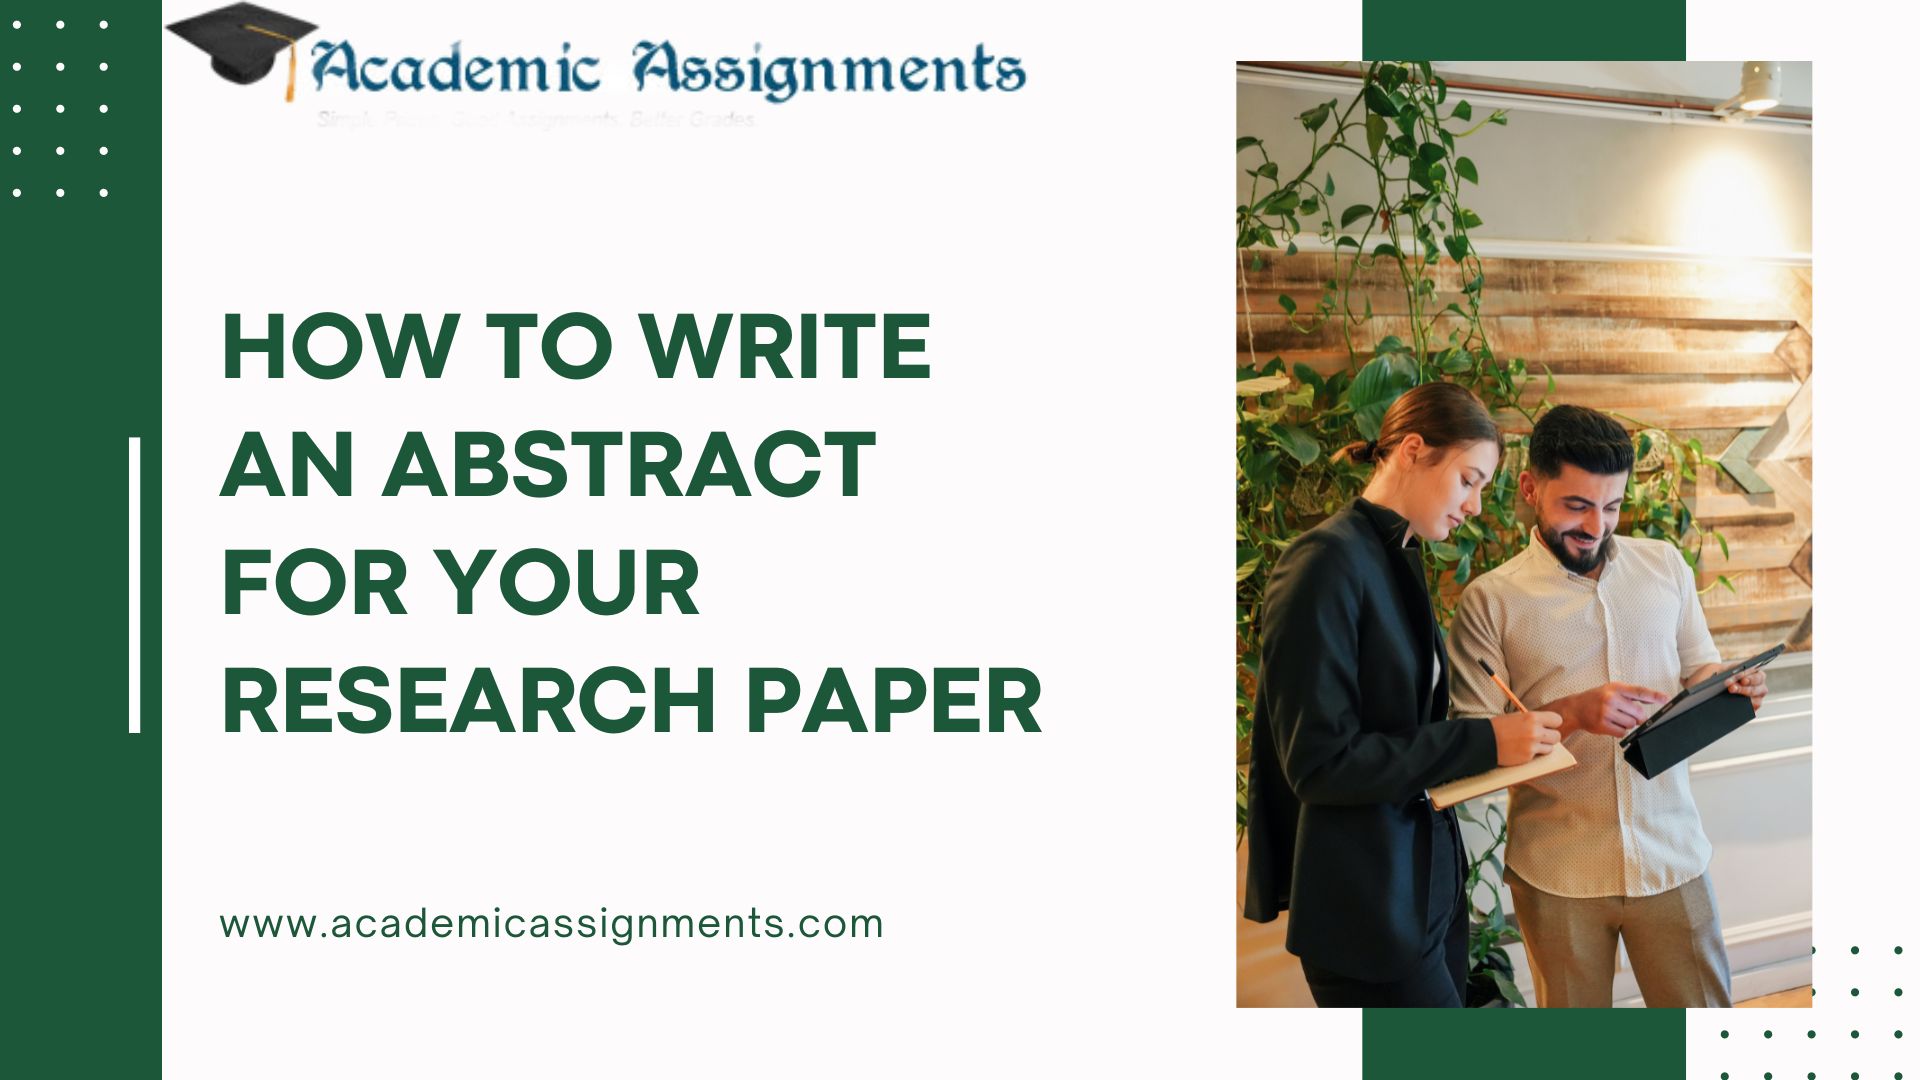 How to Write an Abstract for Your Research Paper